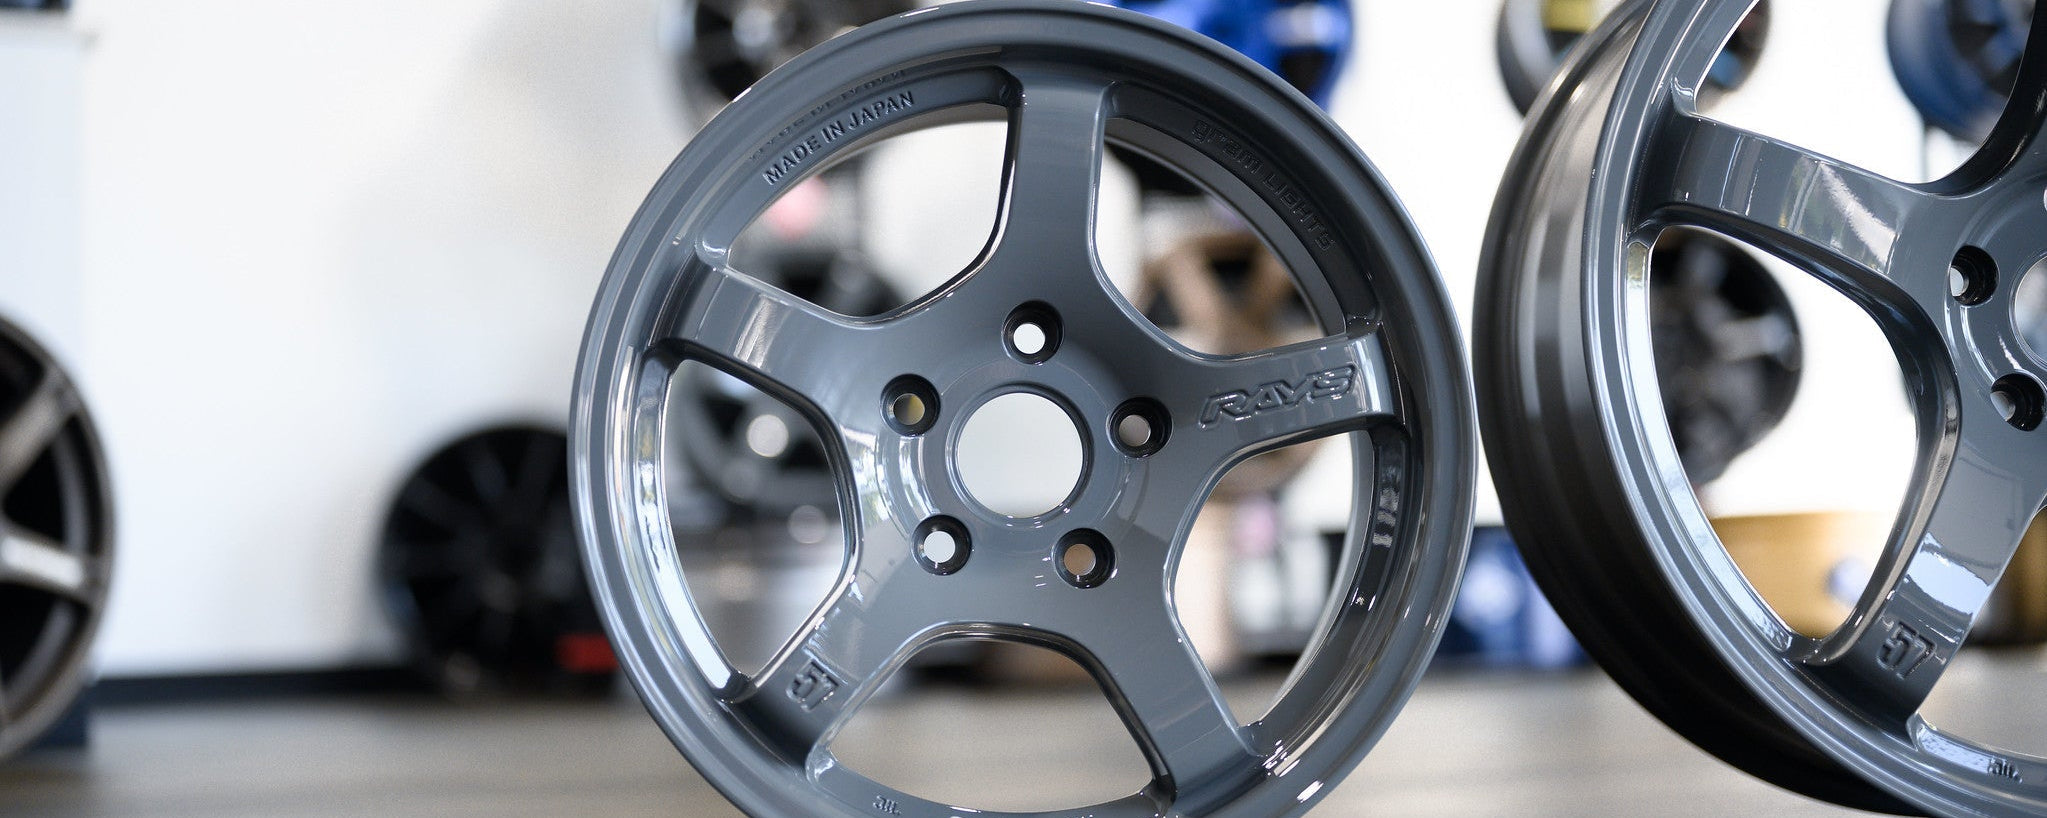 gramLIGHTS 57CR Overseas Model - Premium Wheels from Gram Lights - From just $1790.00! Shop now at MK MOTORSPORTS